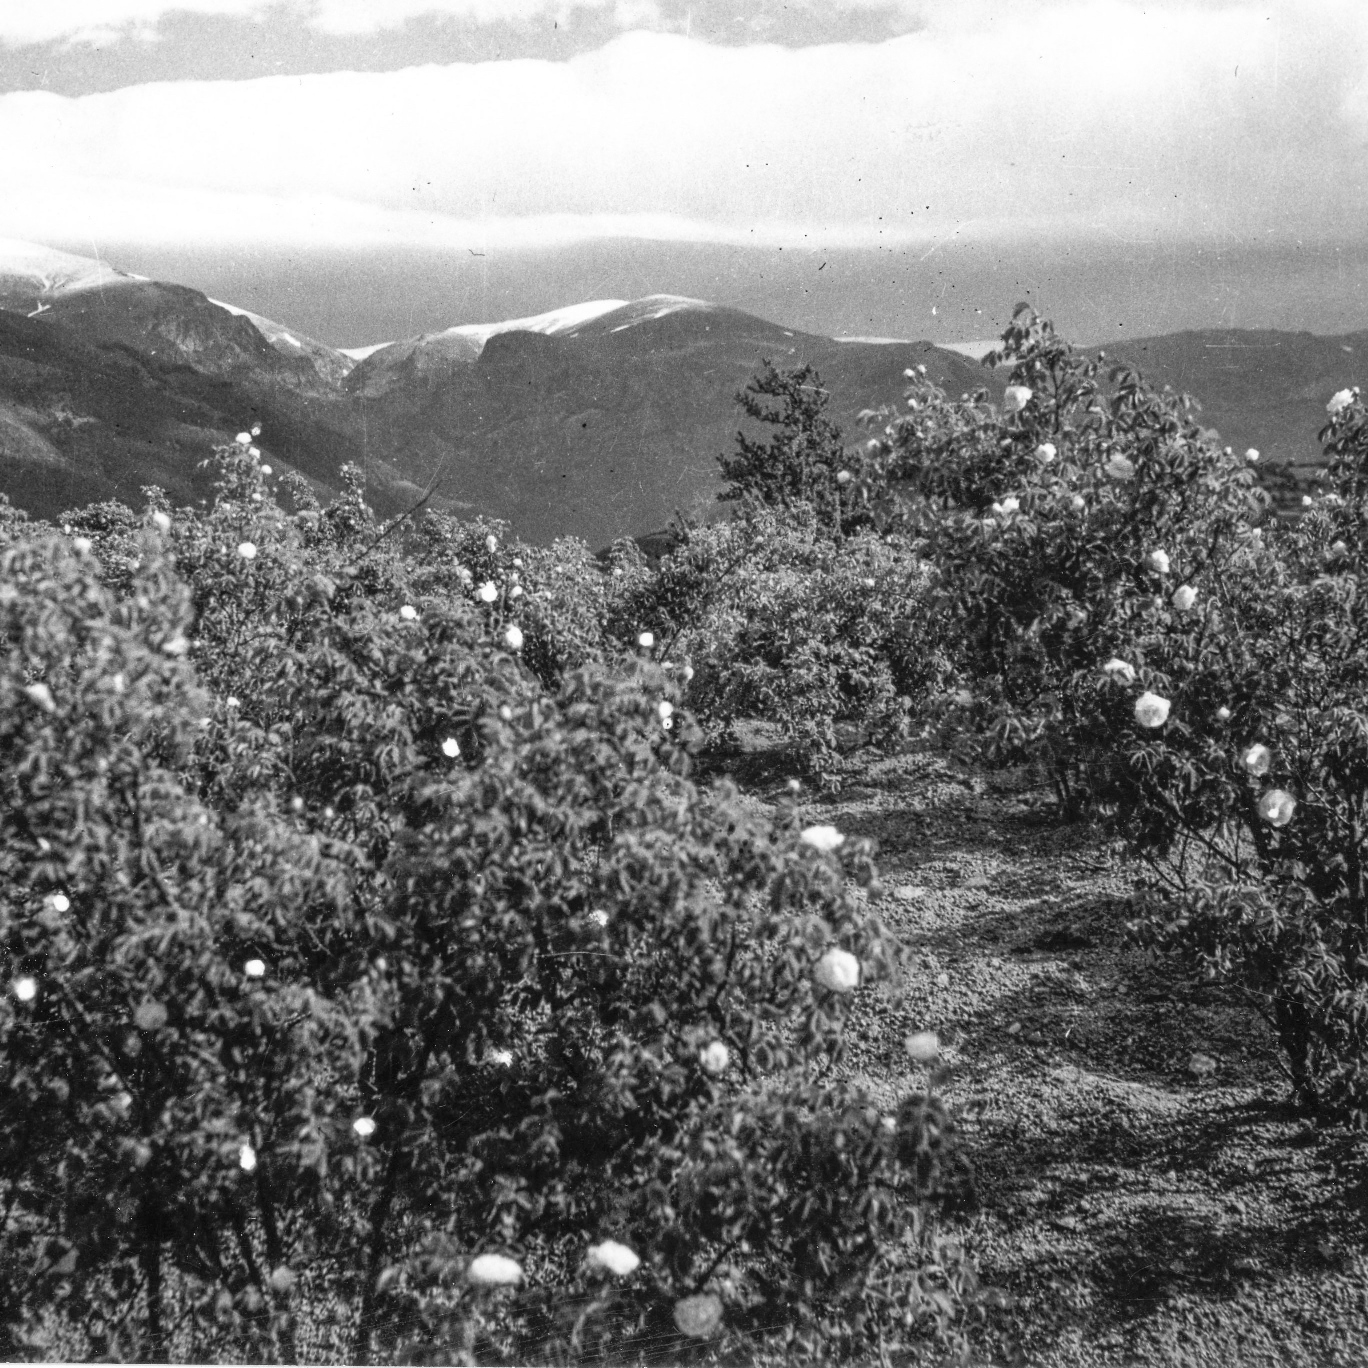 Rose fields with blooming flowers - black and white photo.